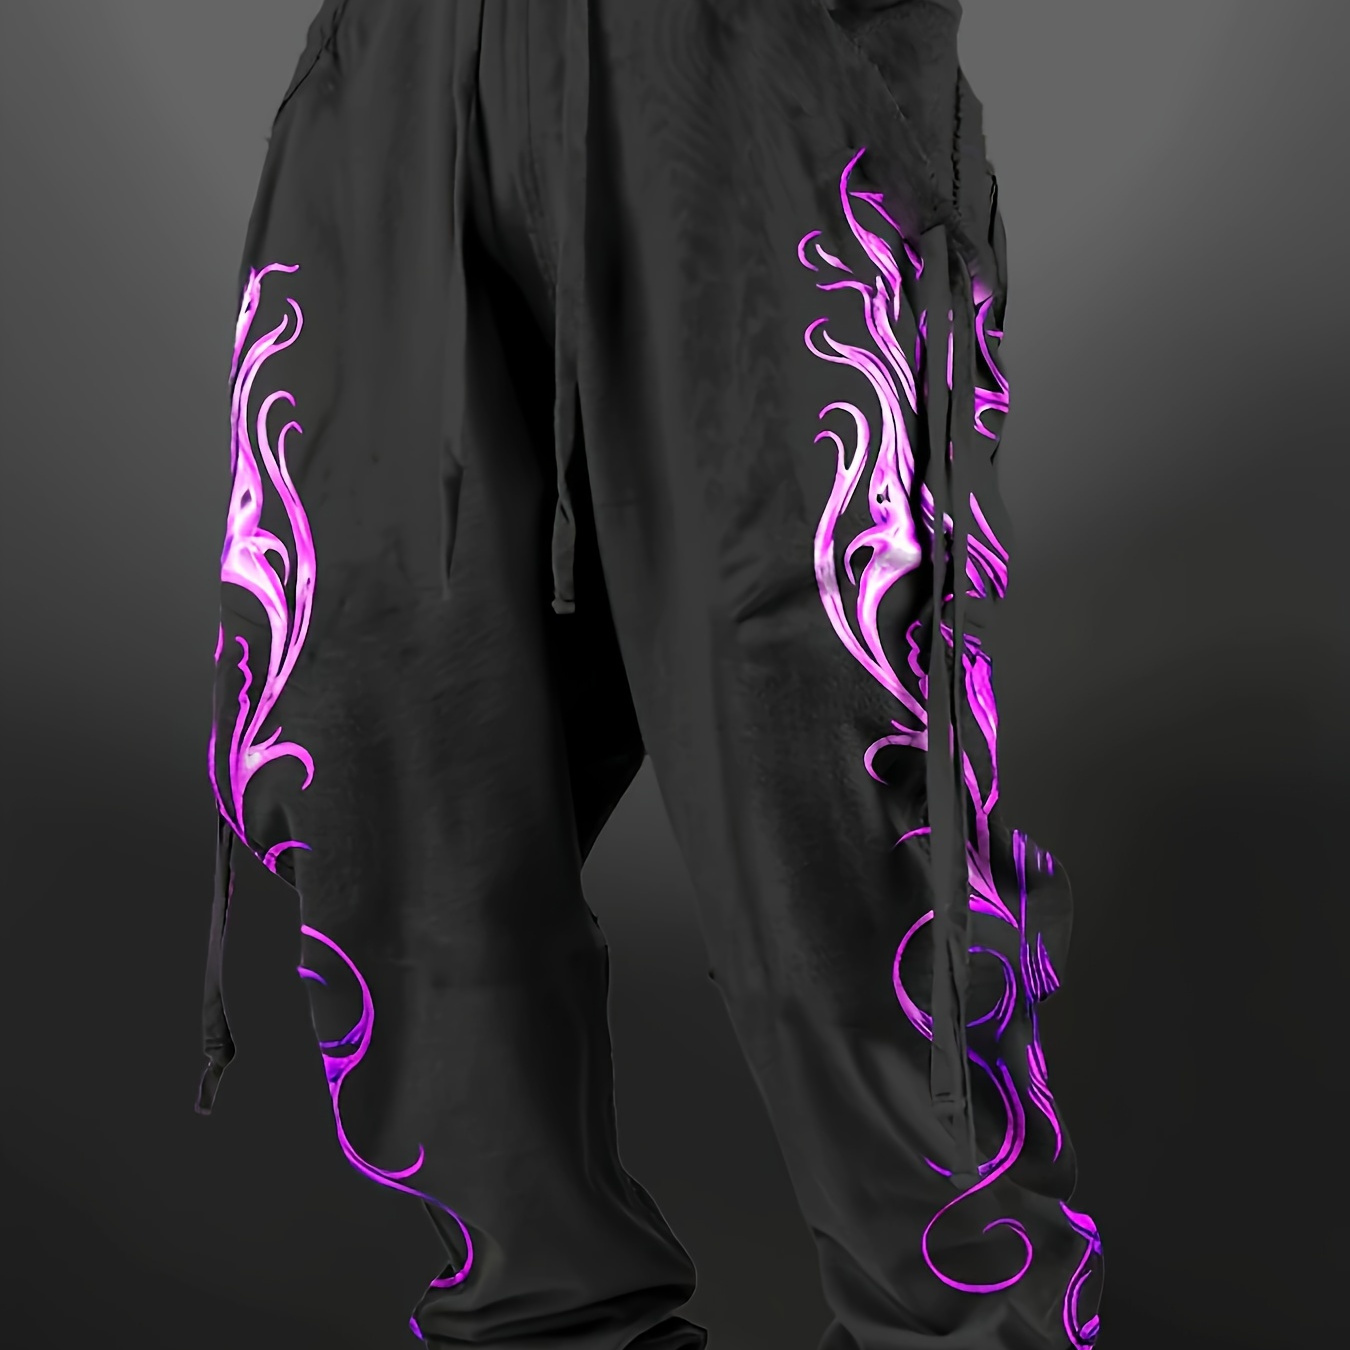 

Stylish Purple Flame Pattern Print Men's Casual Breathable Athletic Pants For Casual Daily Wear